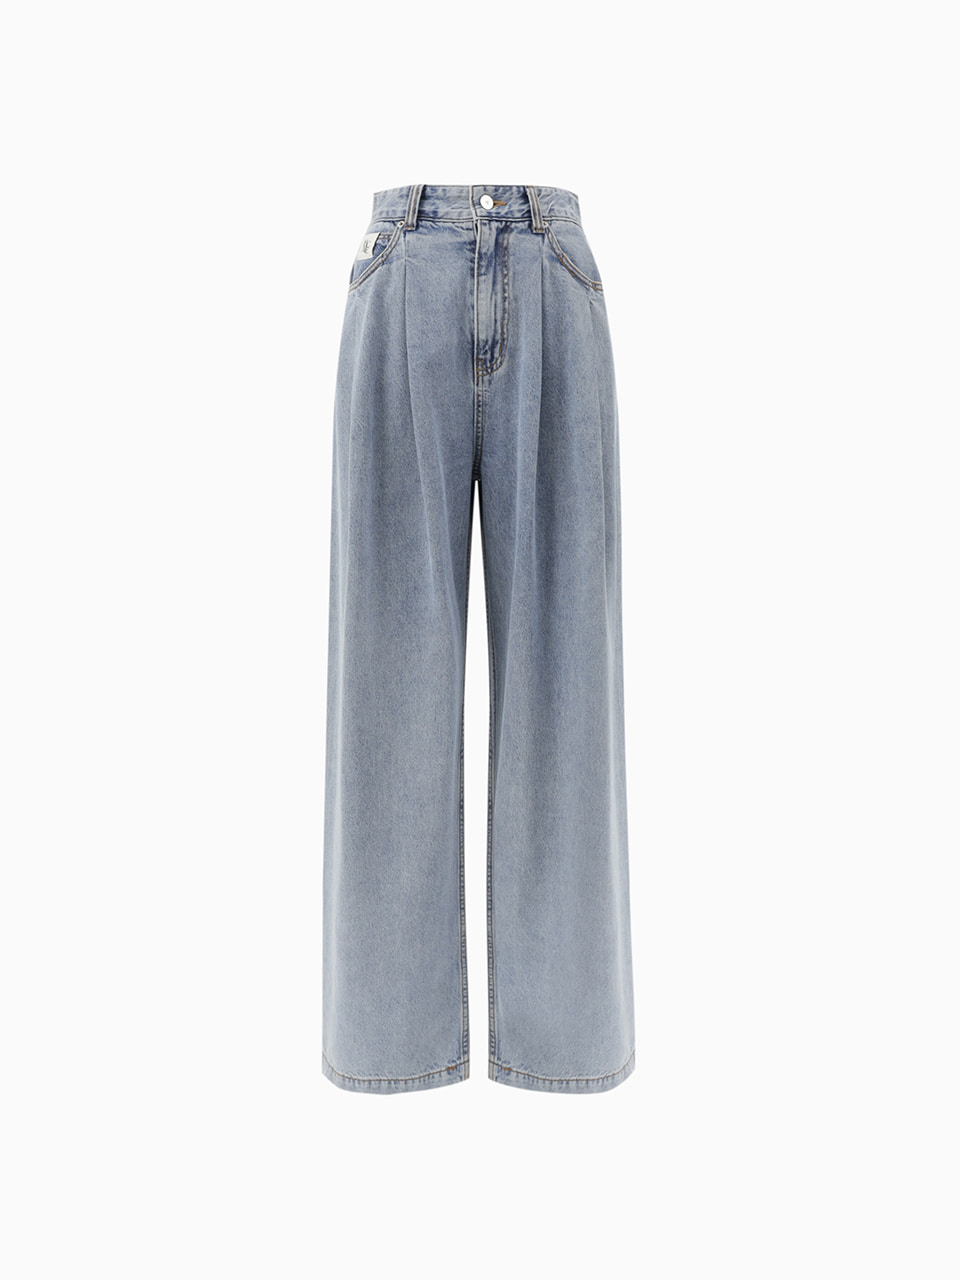 HACIE - EMBROIDERED LOGO TWO-TUCK DENIM PANTS [LIGHT BLUE]